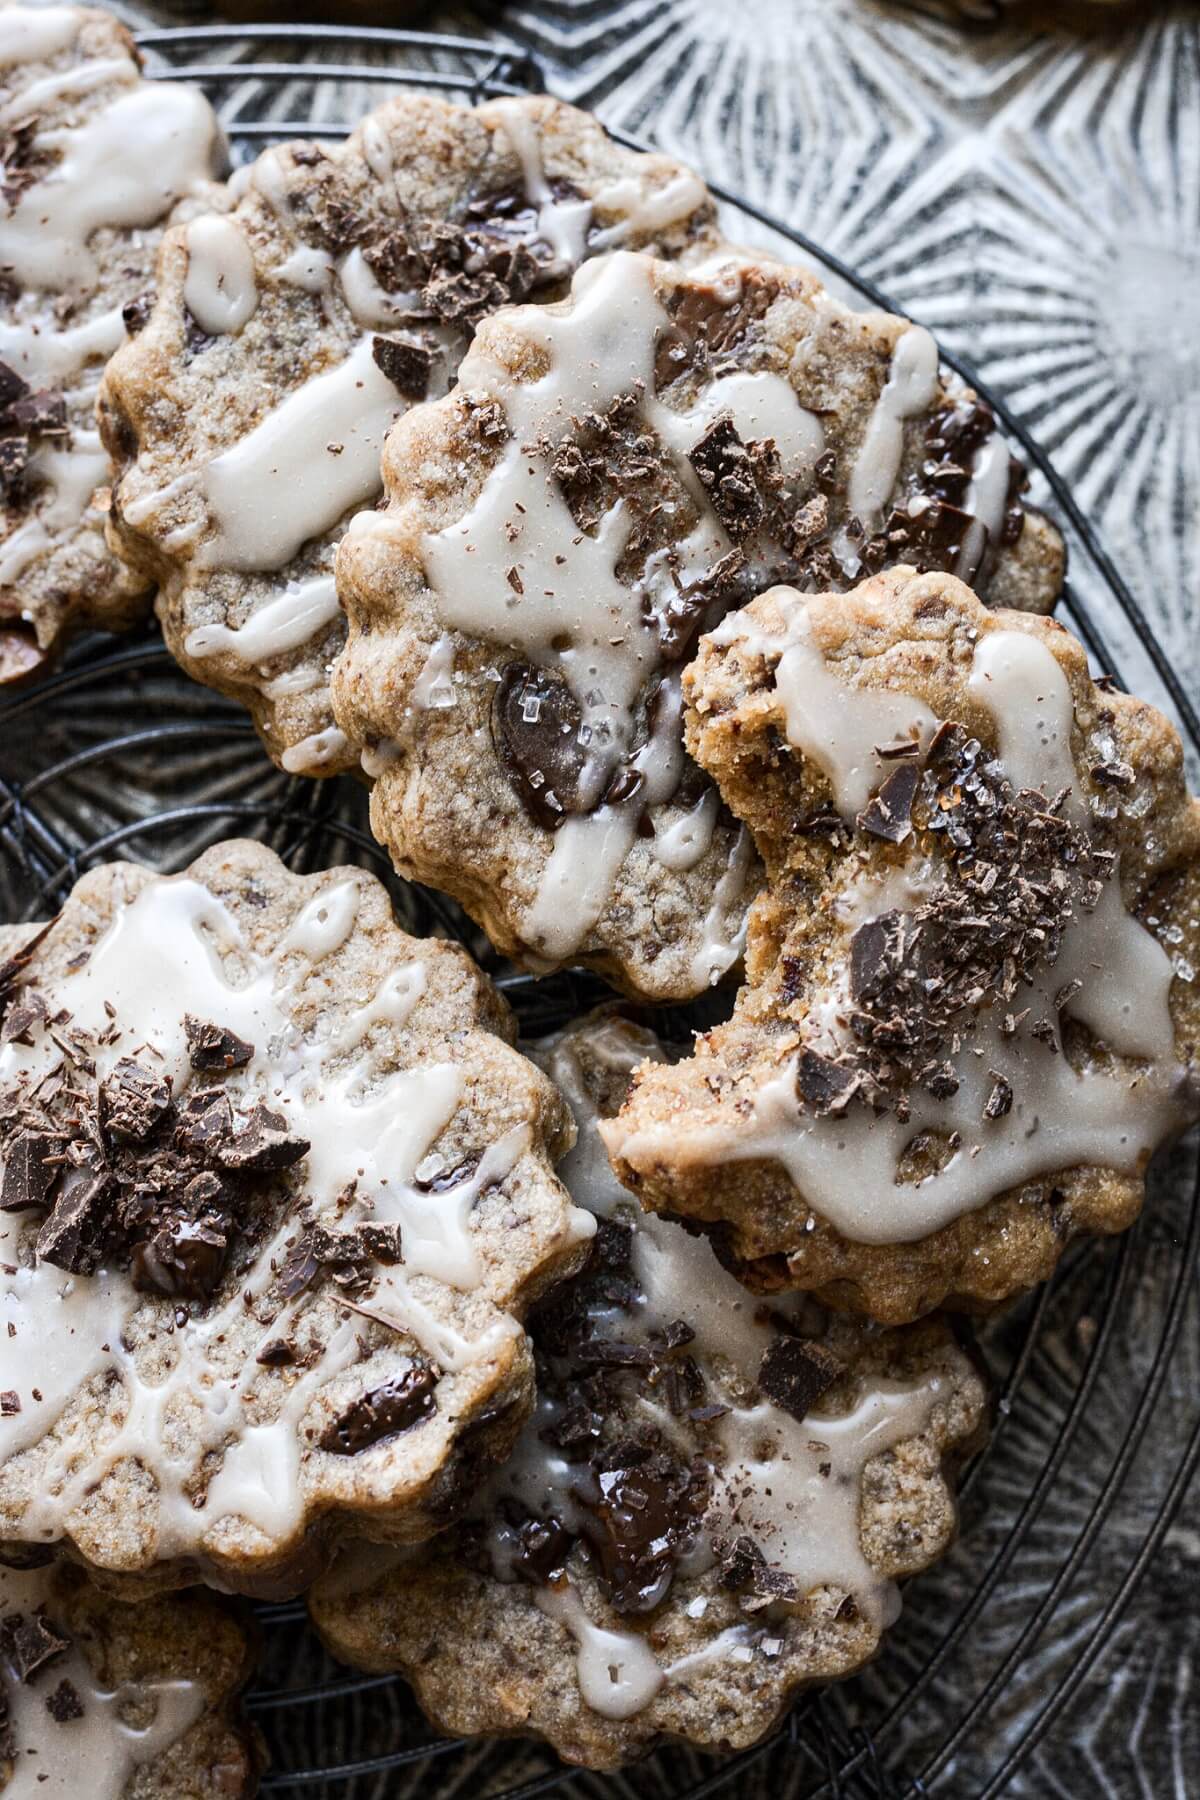 Chocolate chunk shortbread cookies with vanilla icing and chopped chocolate.